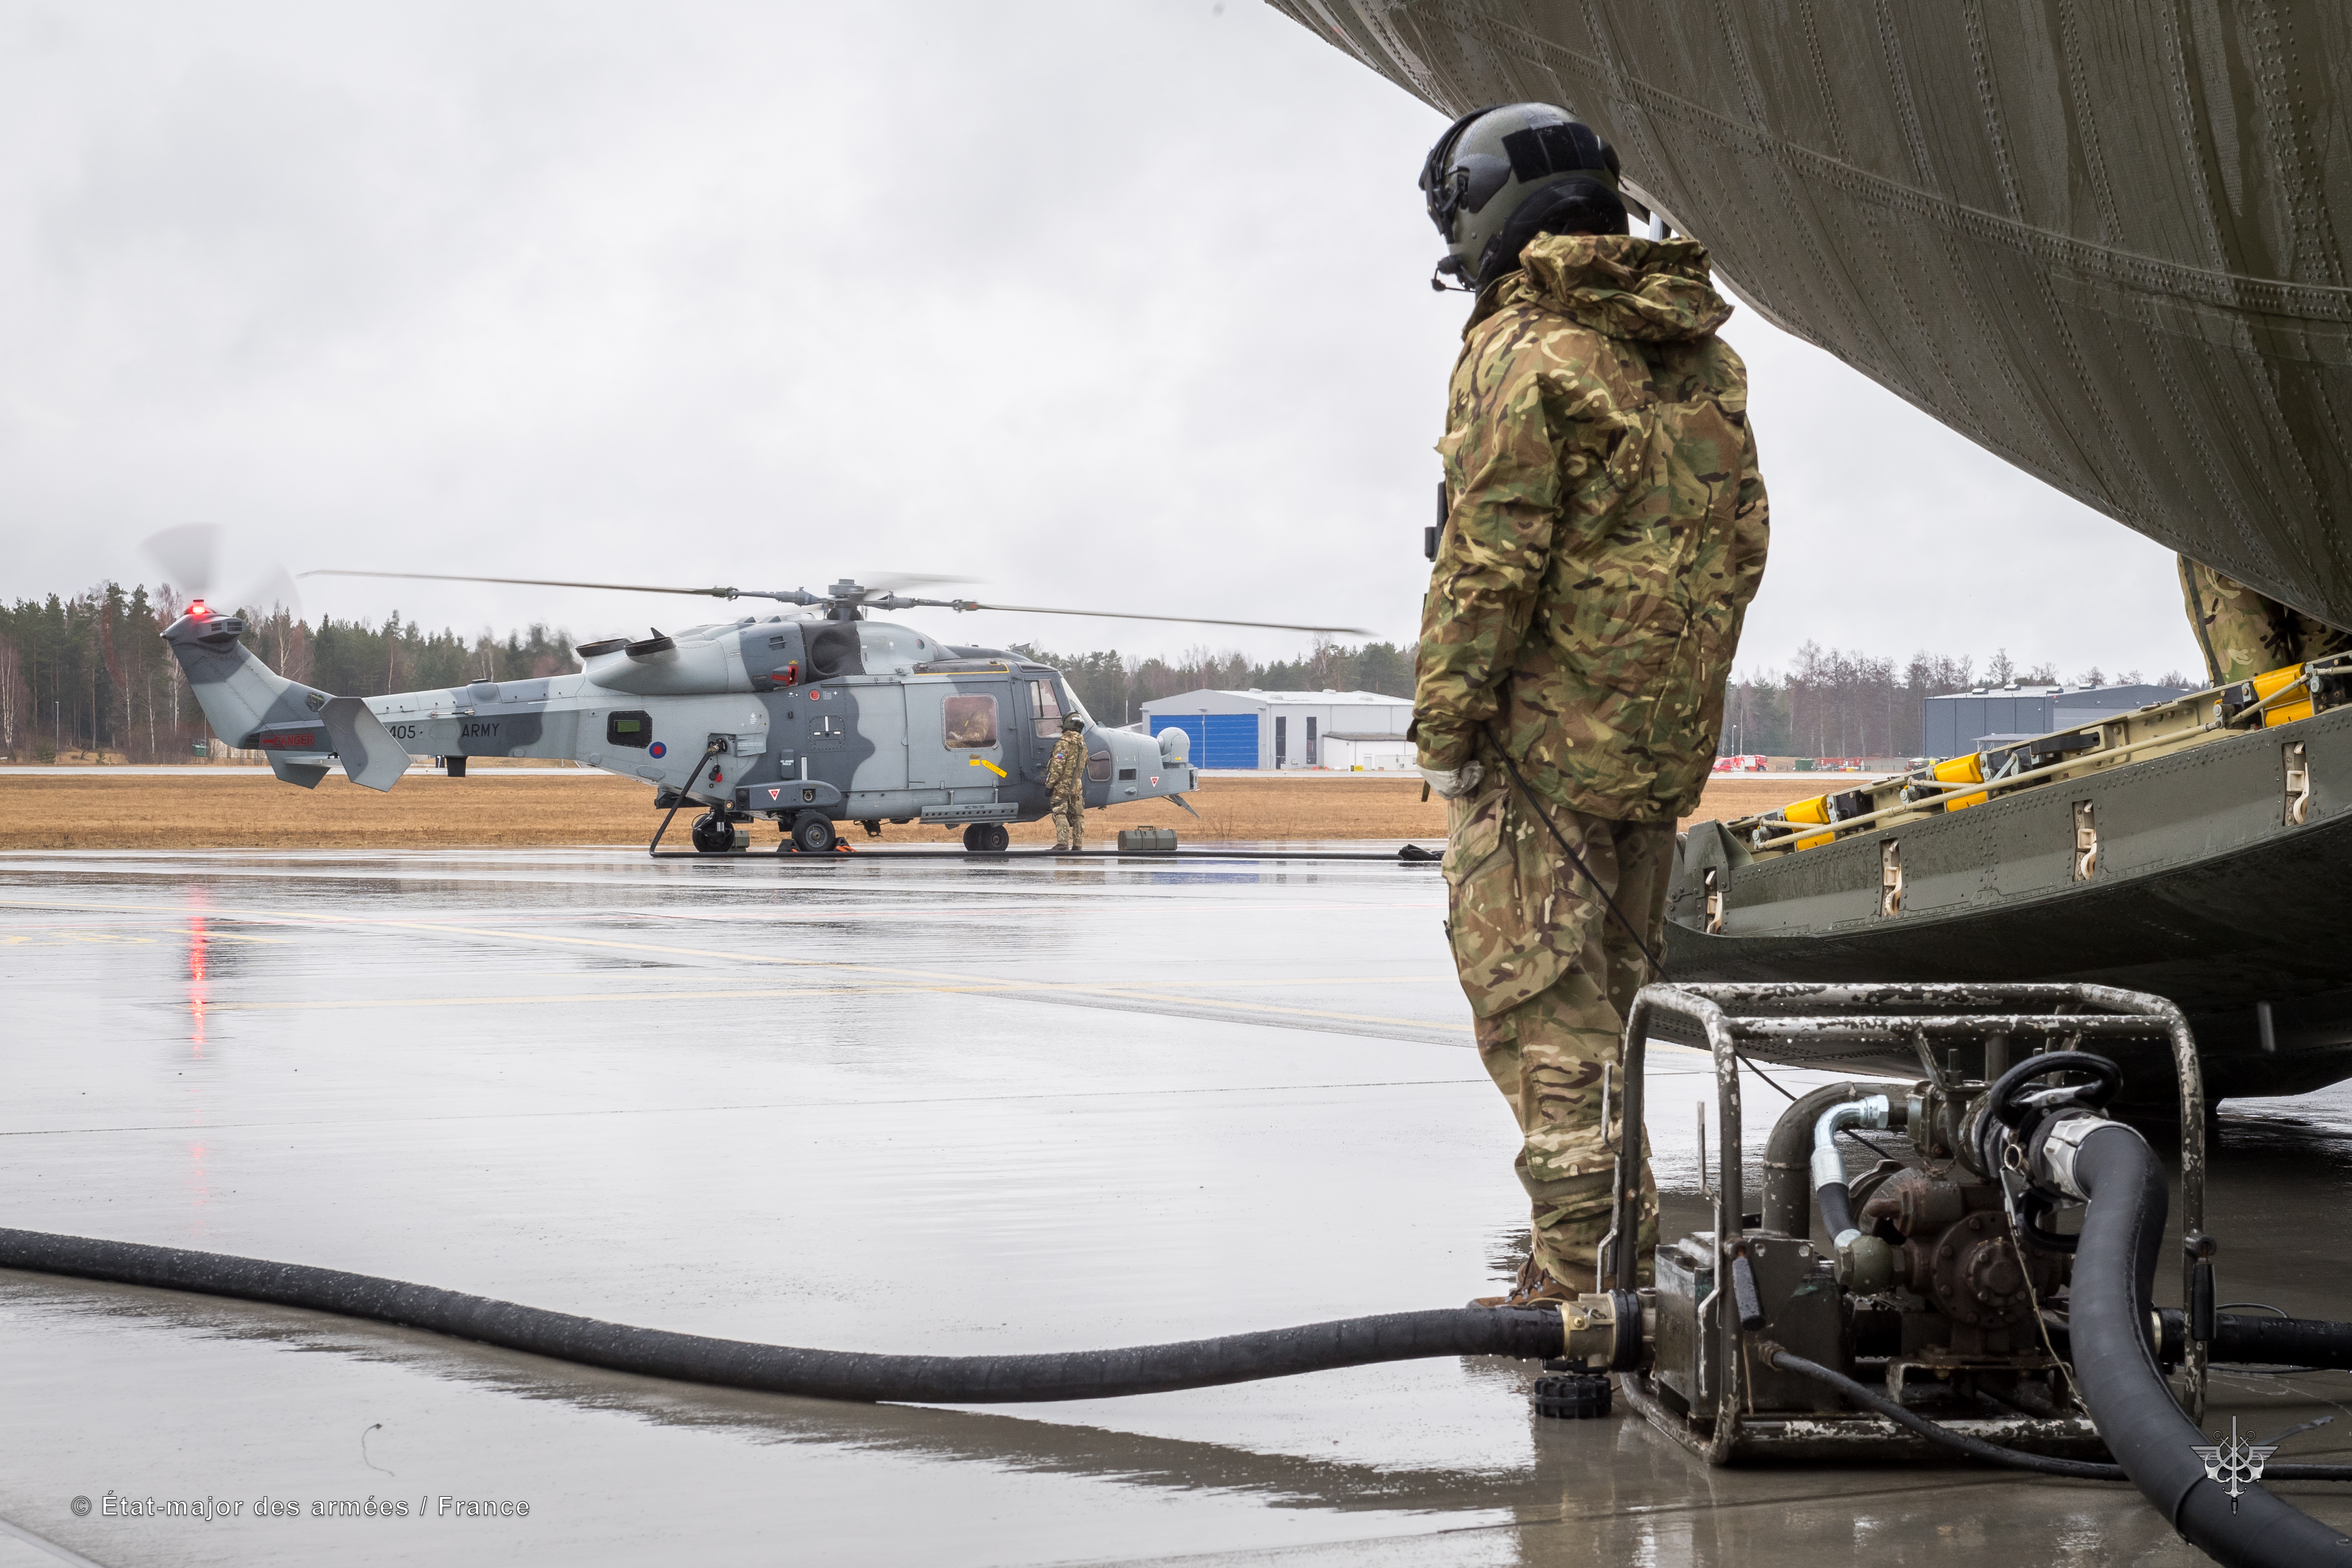 Pilot stands by refuelling pump, looking towards helicopter on airfield.